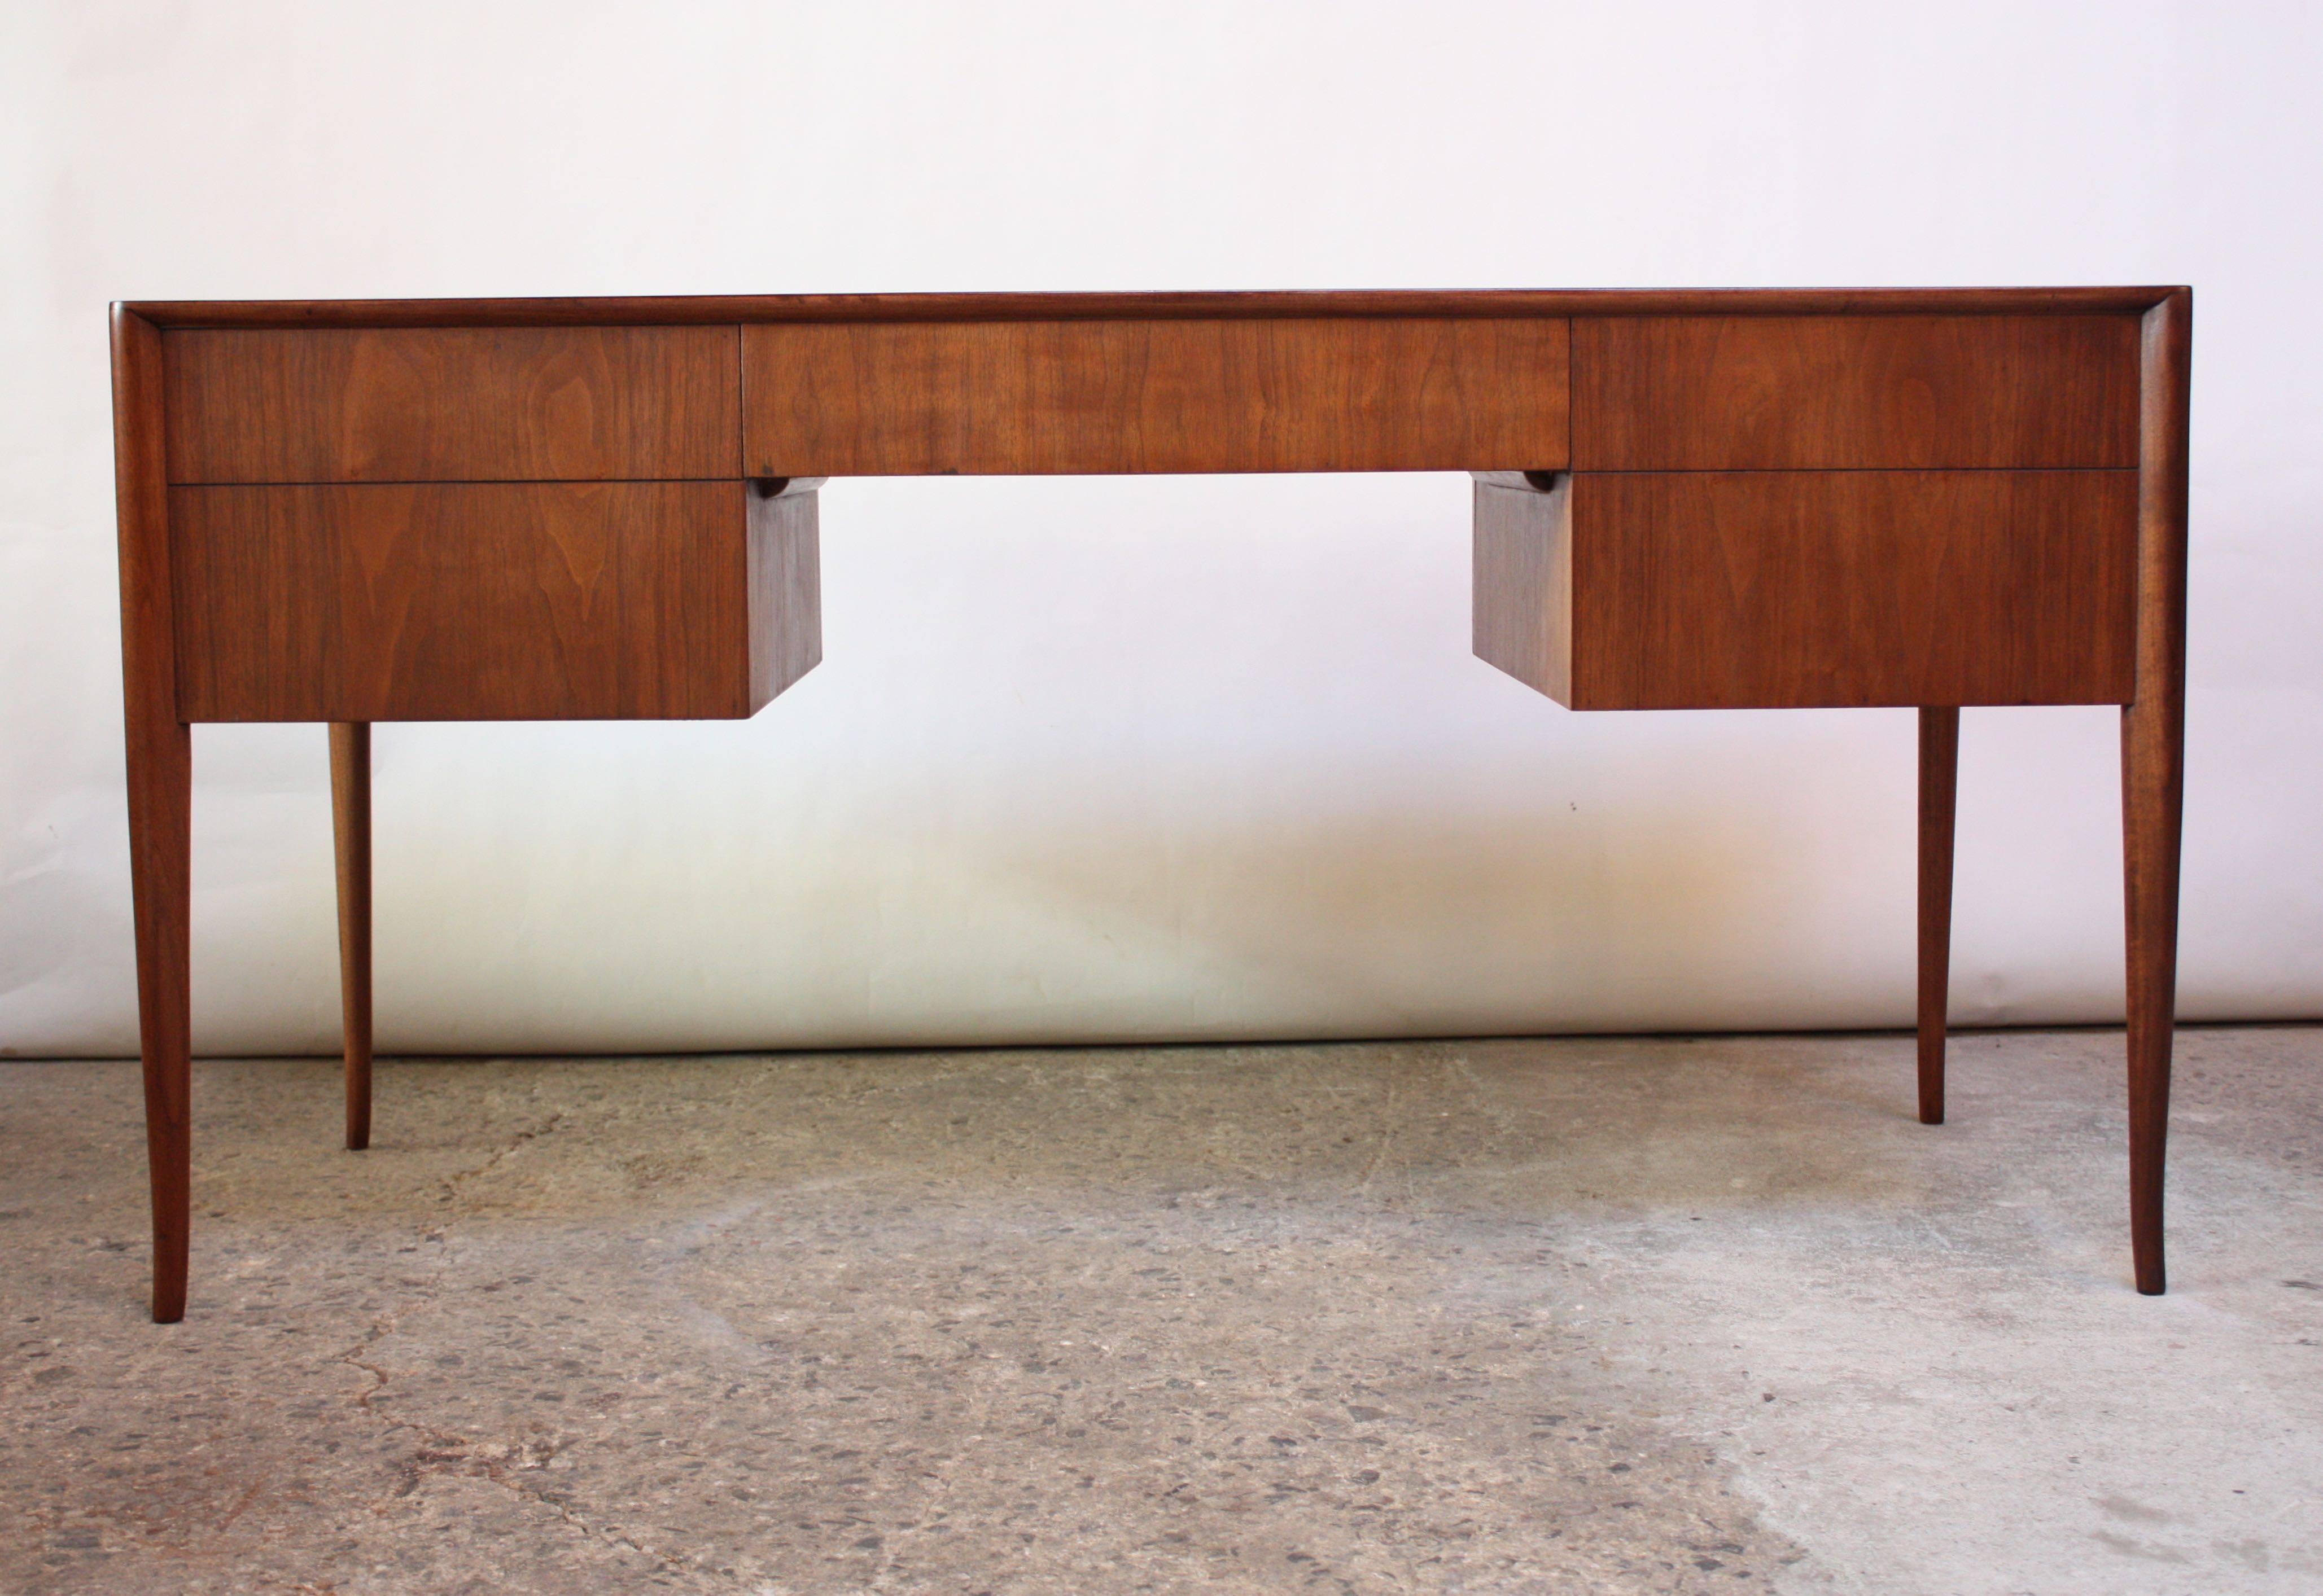 This walnut desk was designed by T.H. Robsjohn-Gibbings for Widdicomb in the 1950s. It is finished on both sides and features two large drawers on either side and a shallow drawer in the middle. Lovely walnut grain and rich color, expertly restored